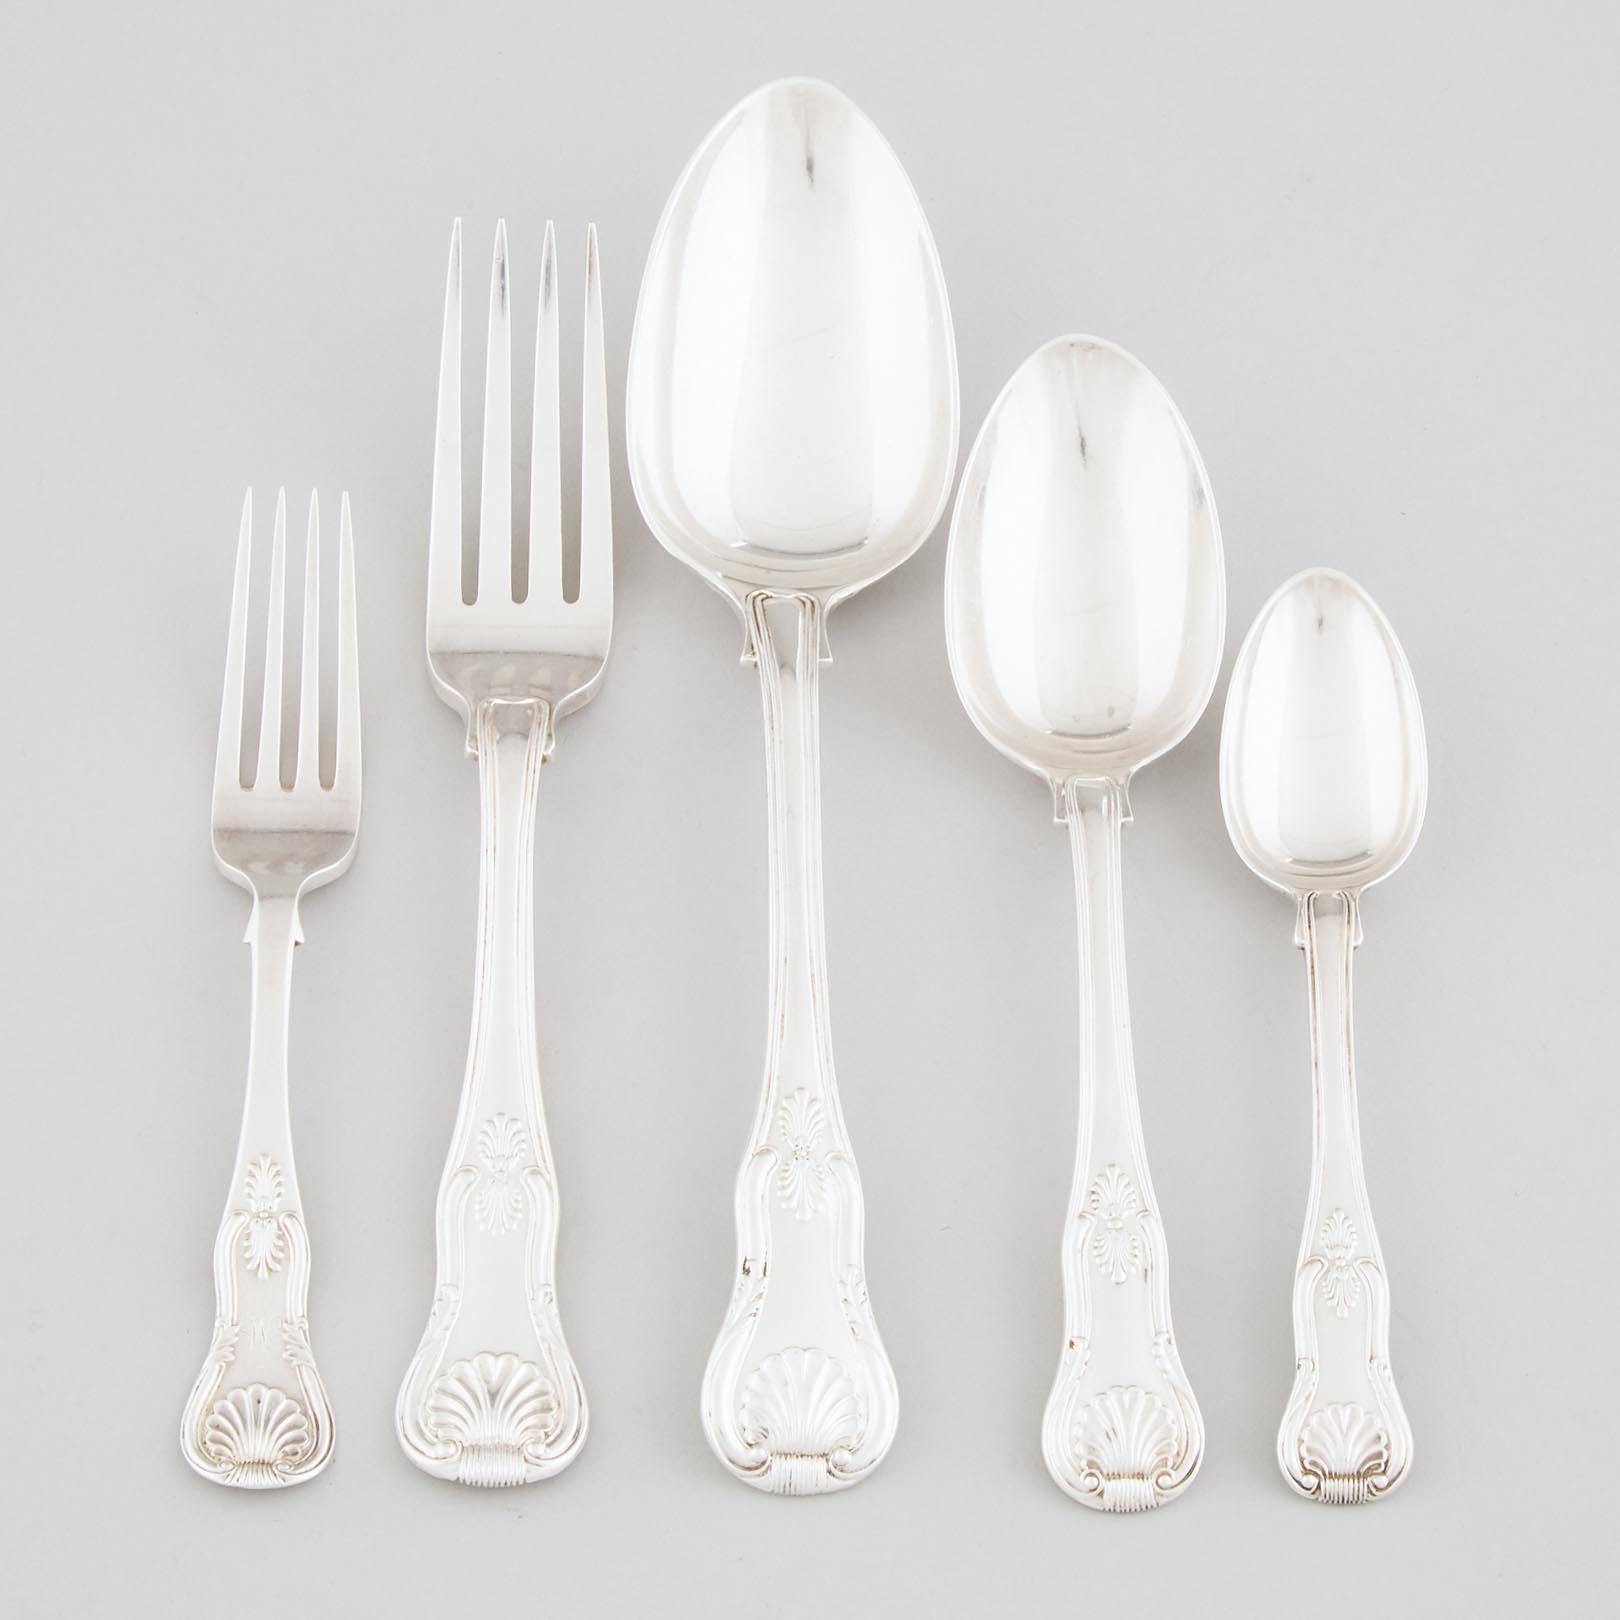 Assembled George IV and Early Victorian Silver Kings Pattern Flatware Service, mainly William Eaton, and Randall Chatterton, London, 1826-43